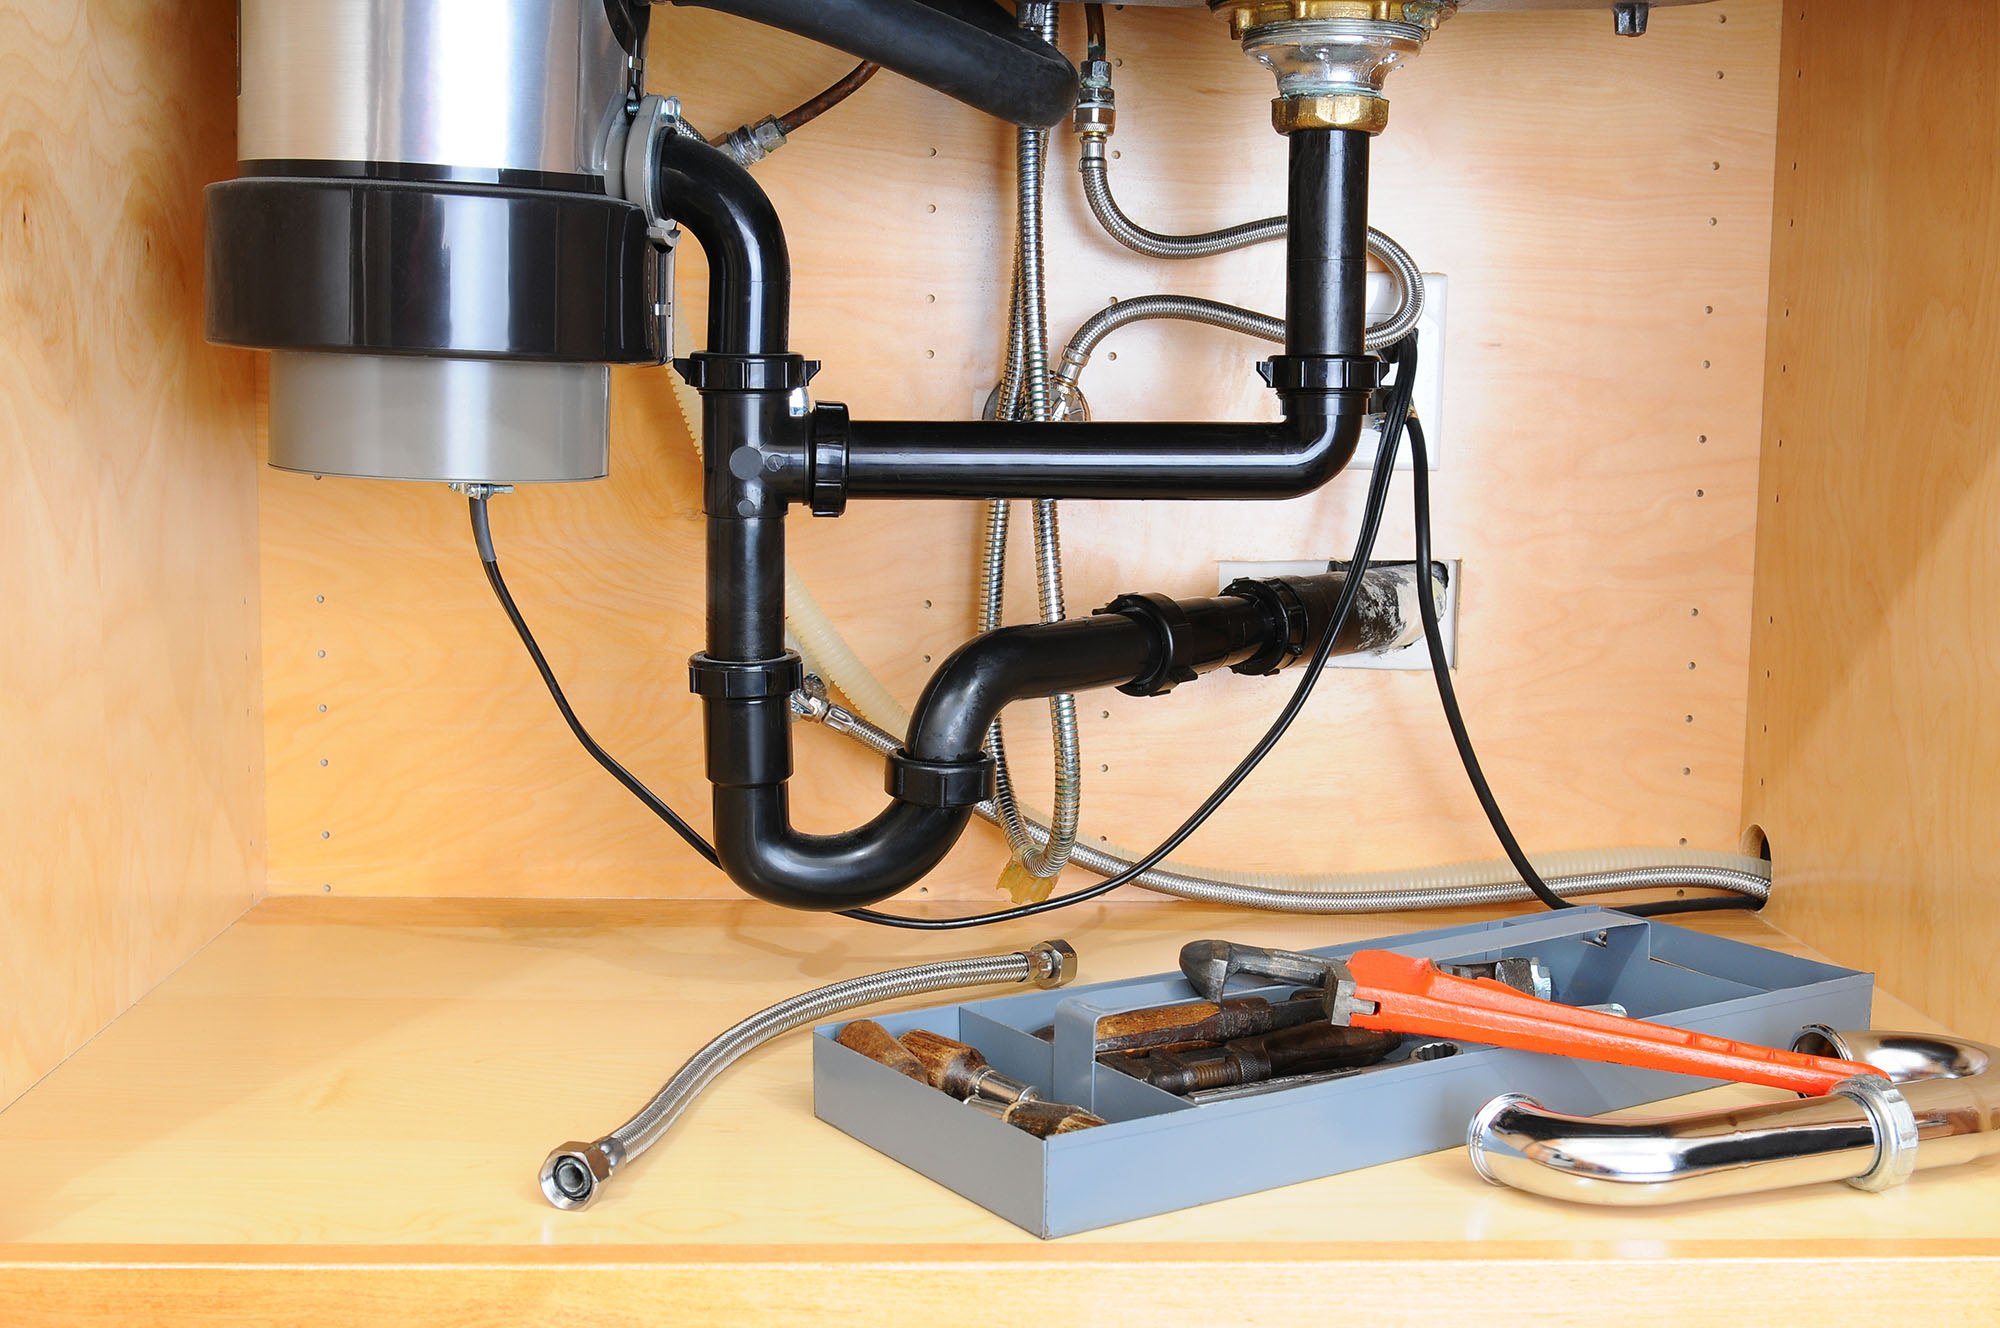 kitchen sink plumbing with disposal and dishwasher